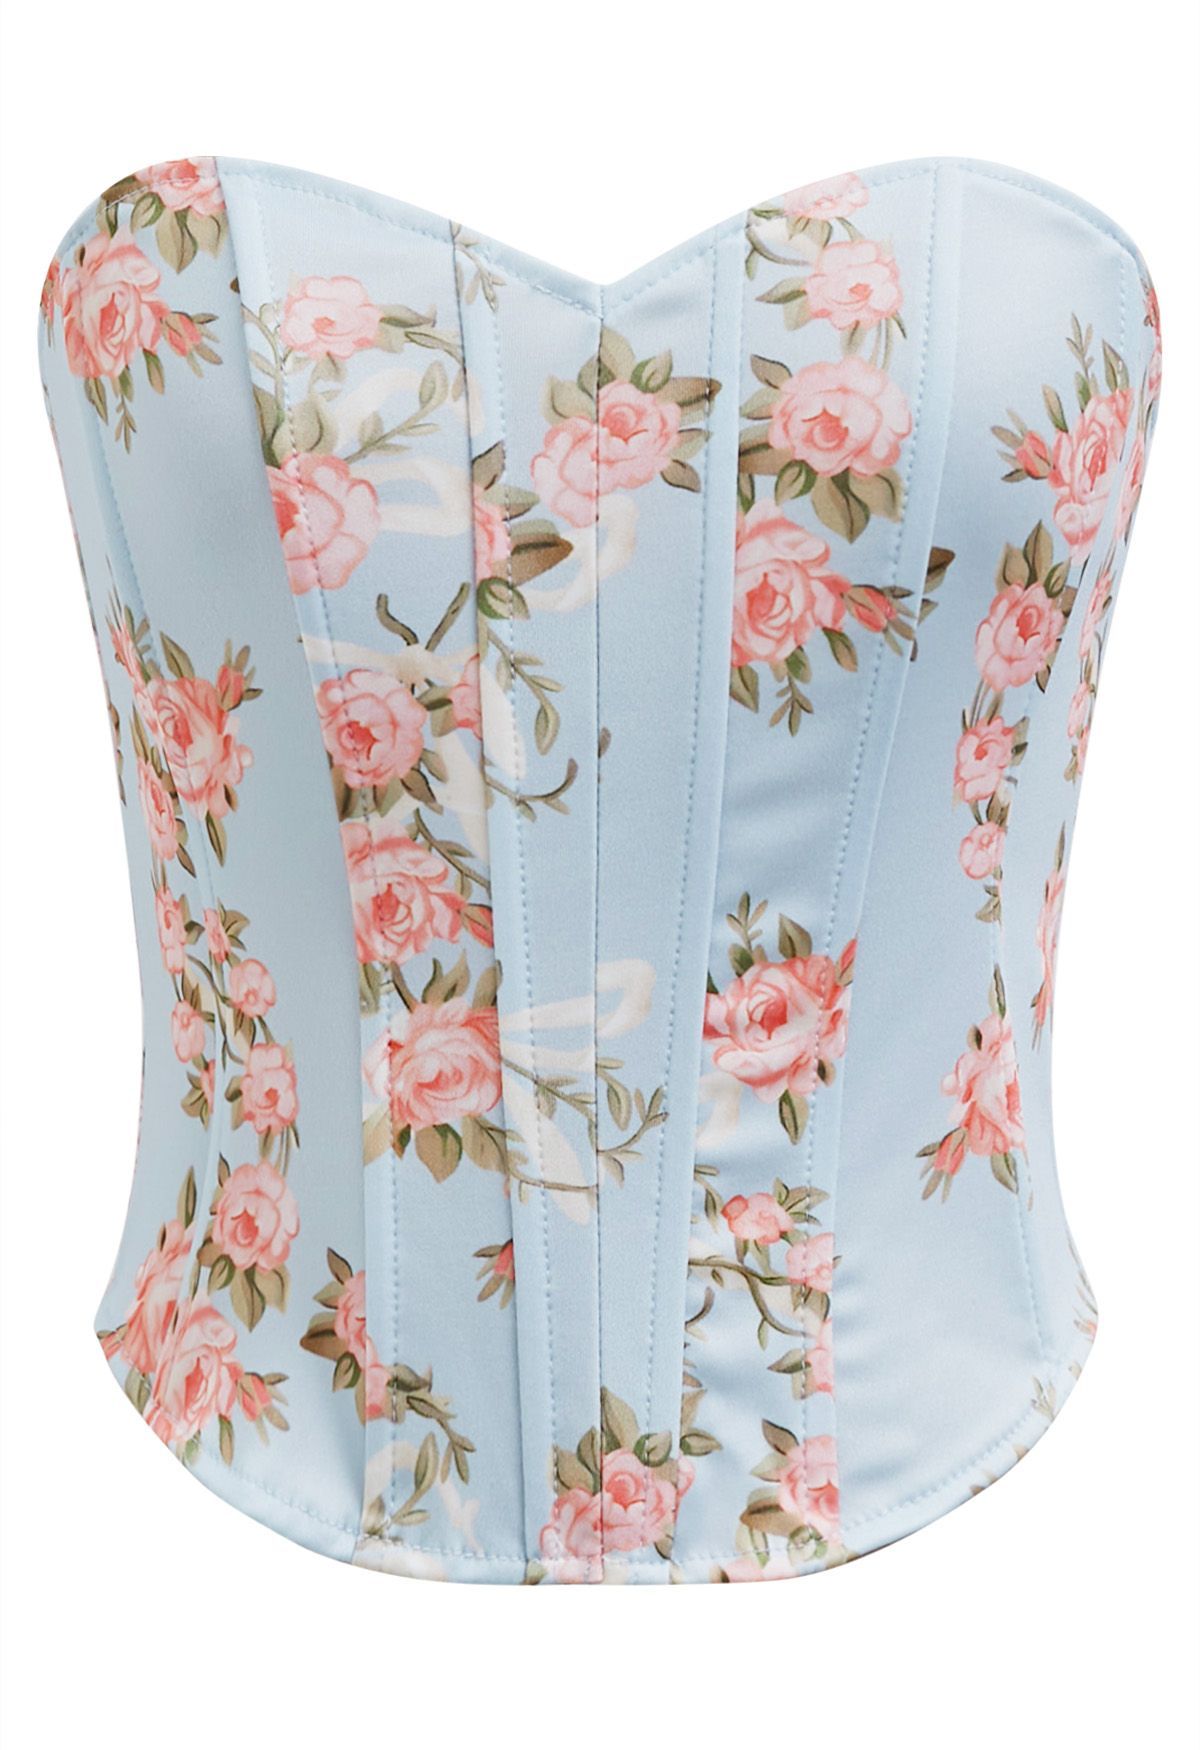 Floral Printed Corset Bustier Top in Baby Blue | Chicwish